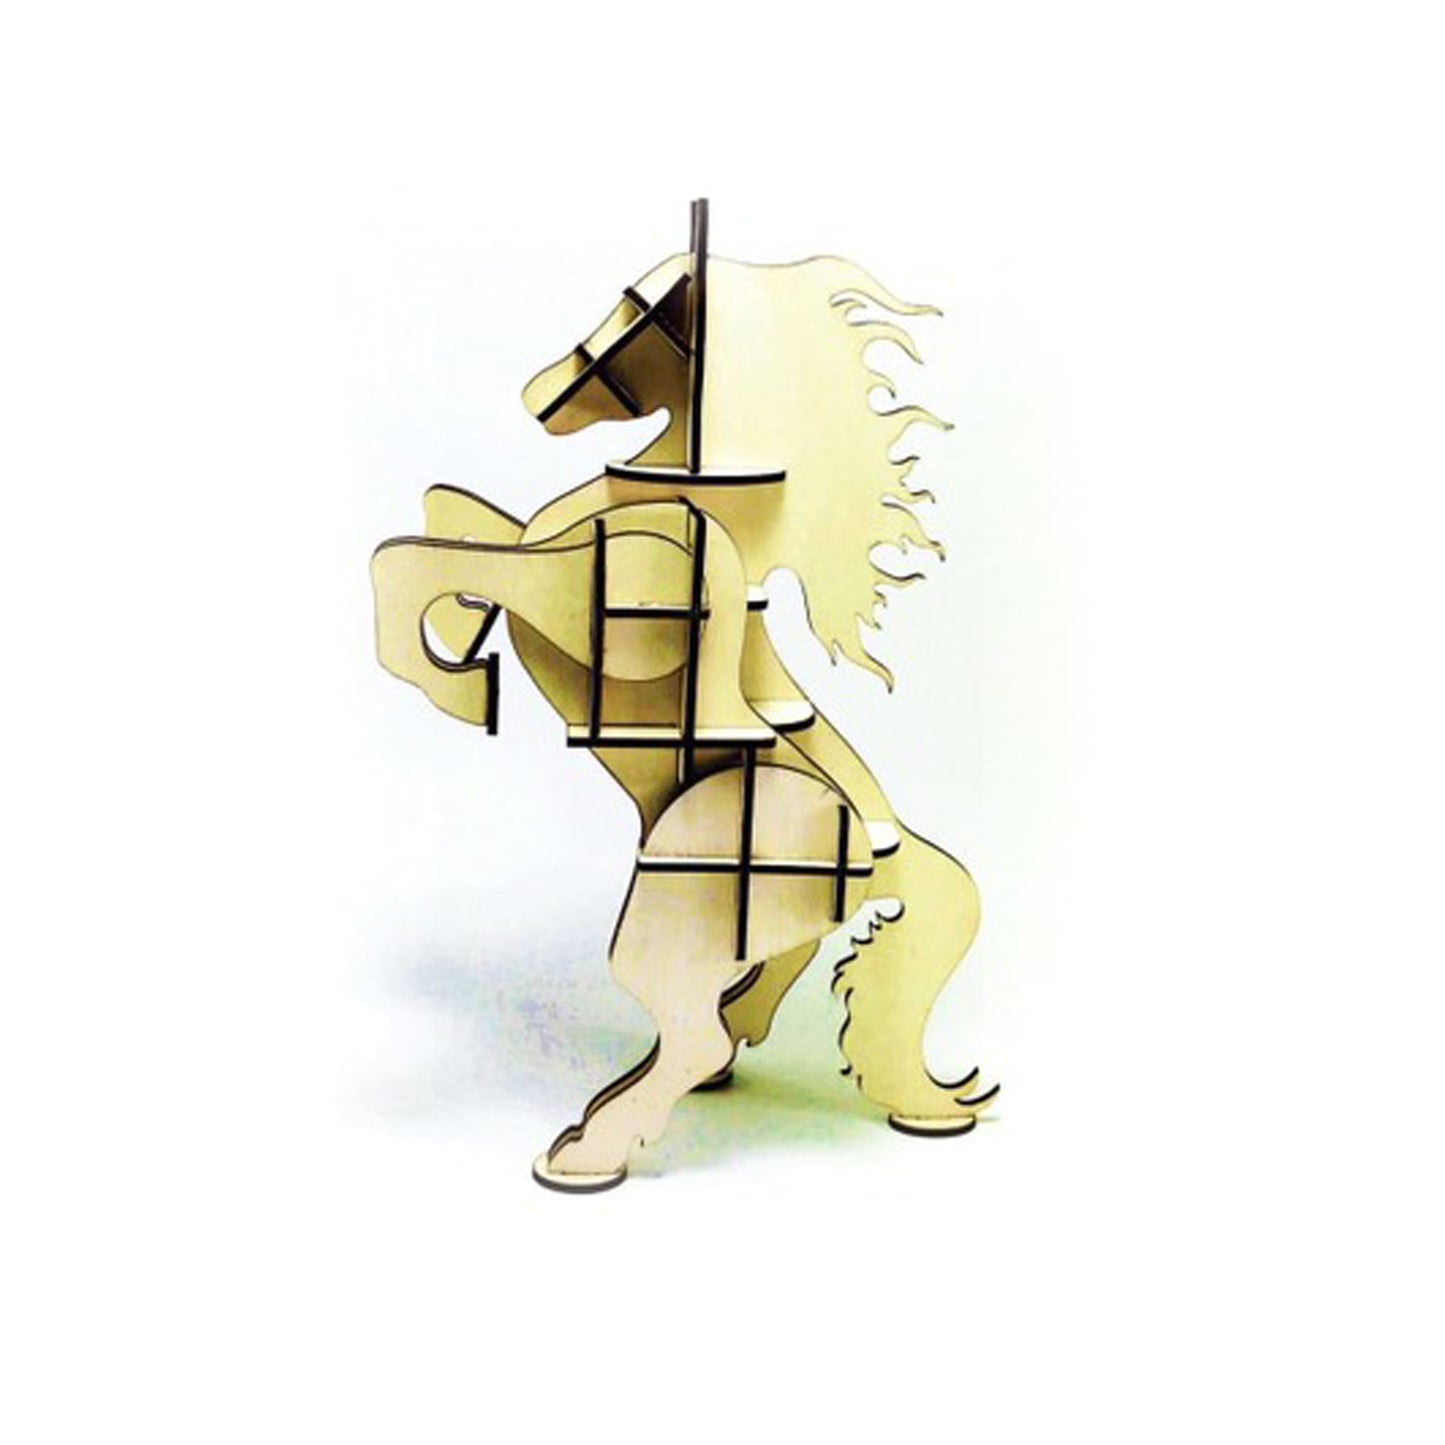 Laser cutting of horse wood toy model